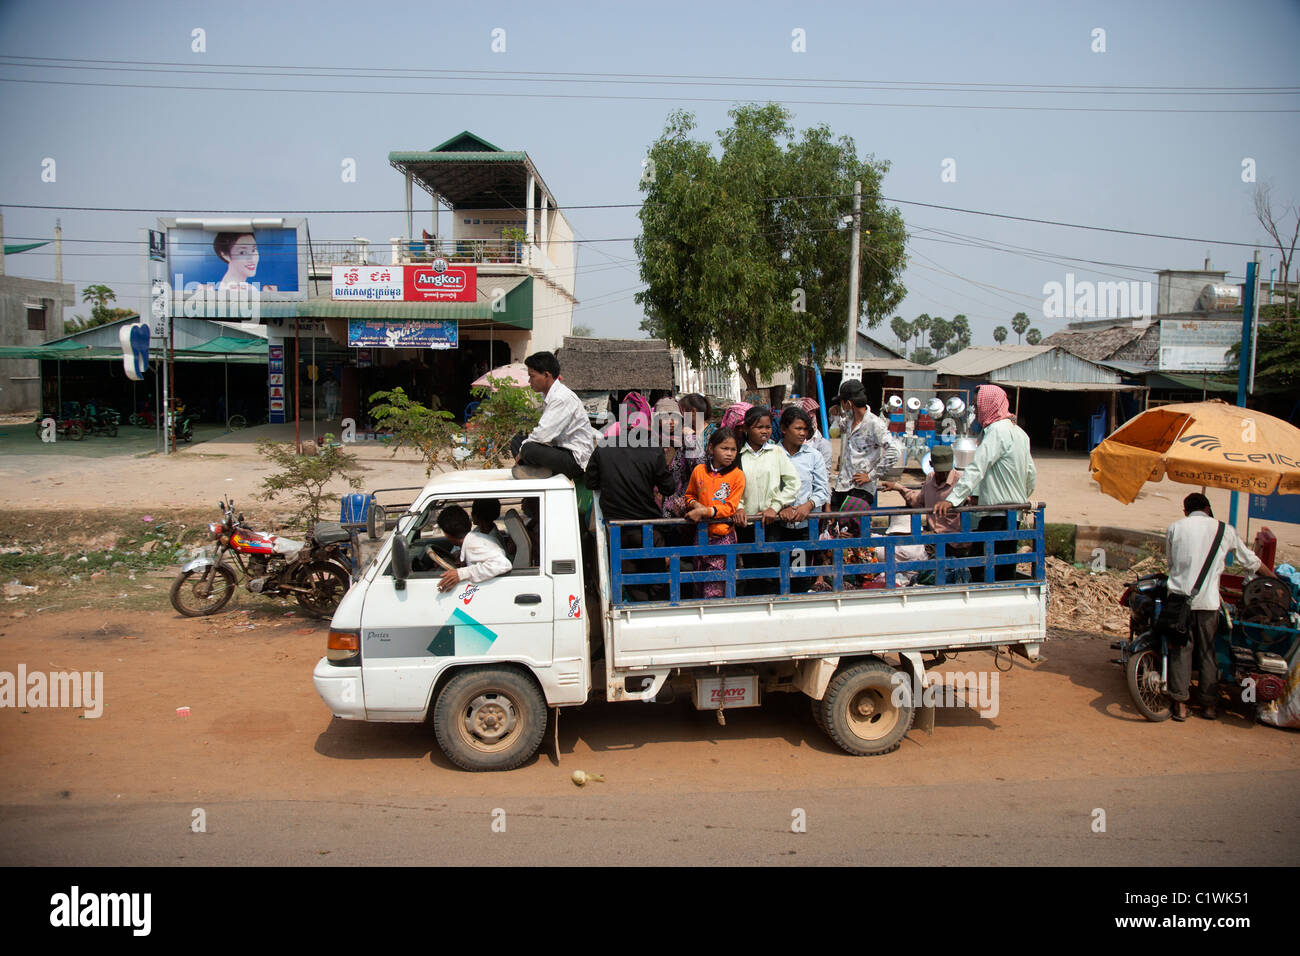 Truck full of People in Rural Cambodia Stock Photo